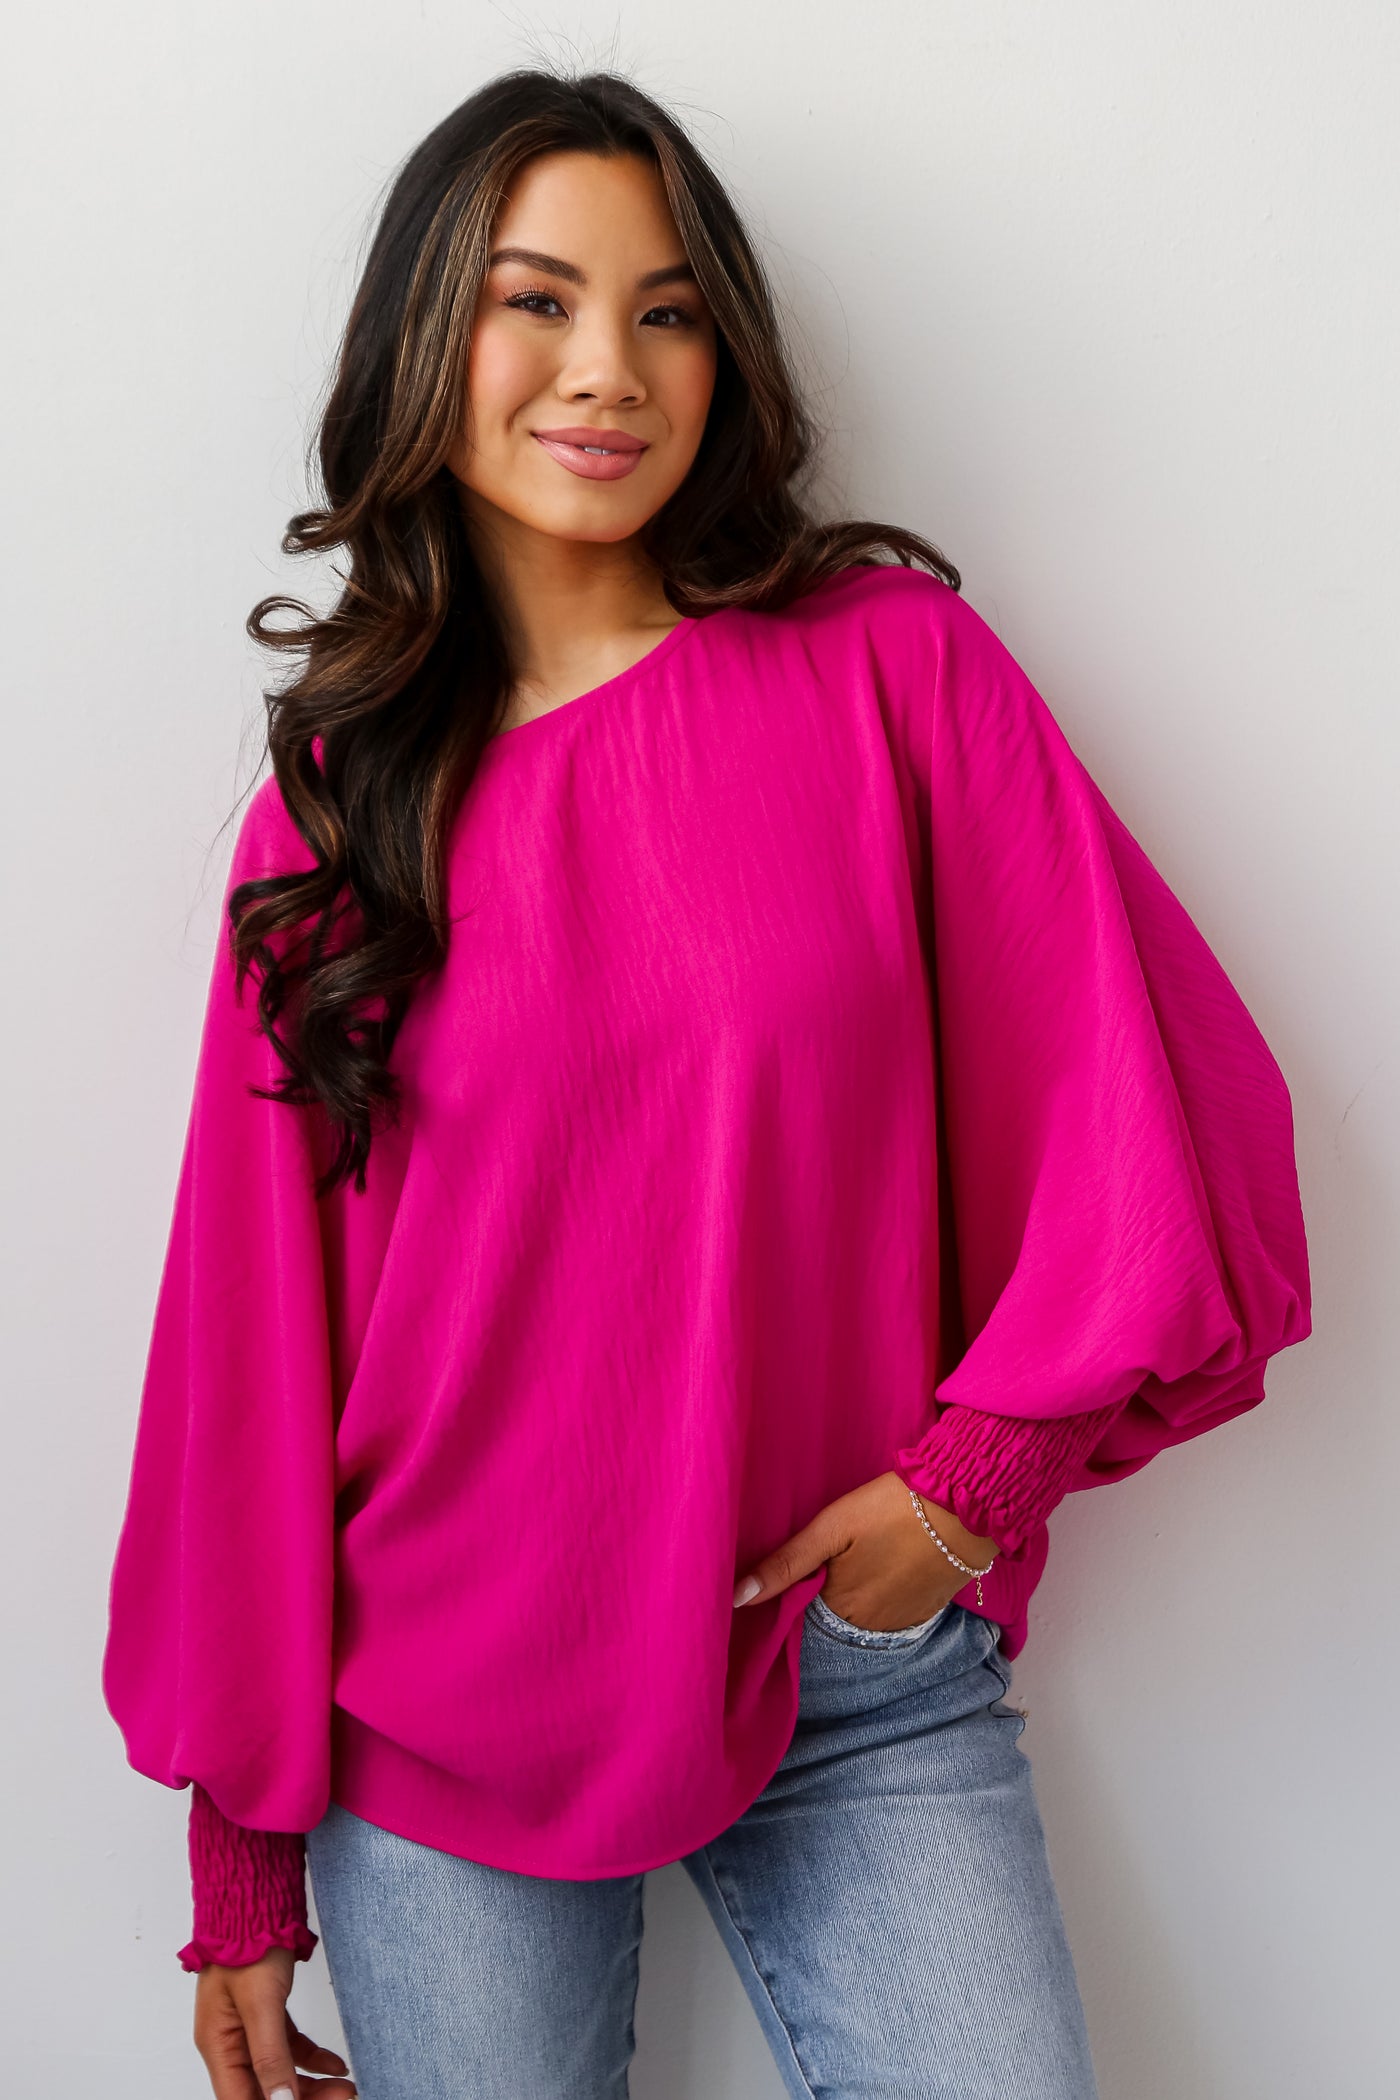 hot pink blouses